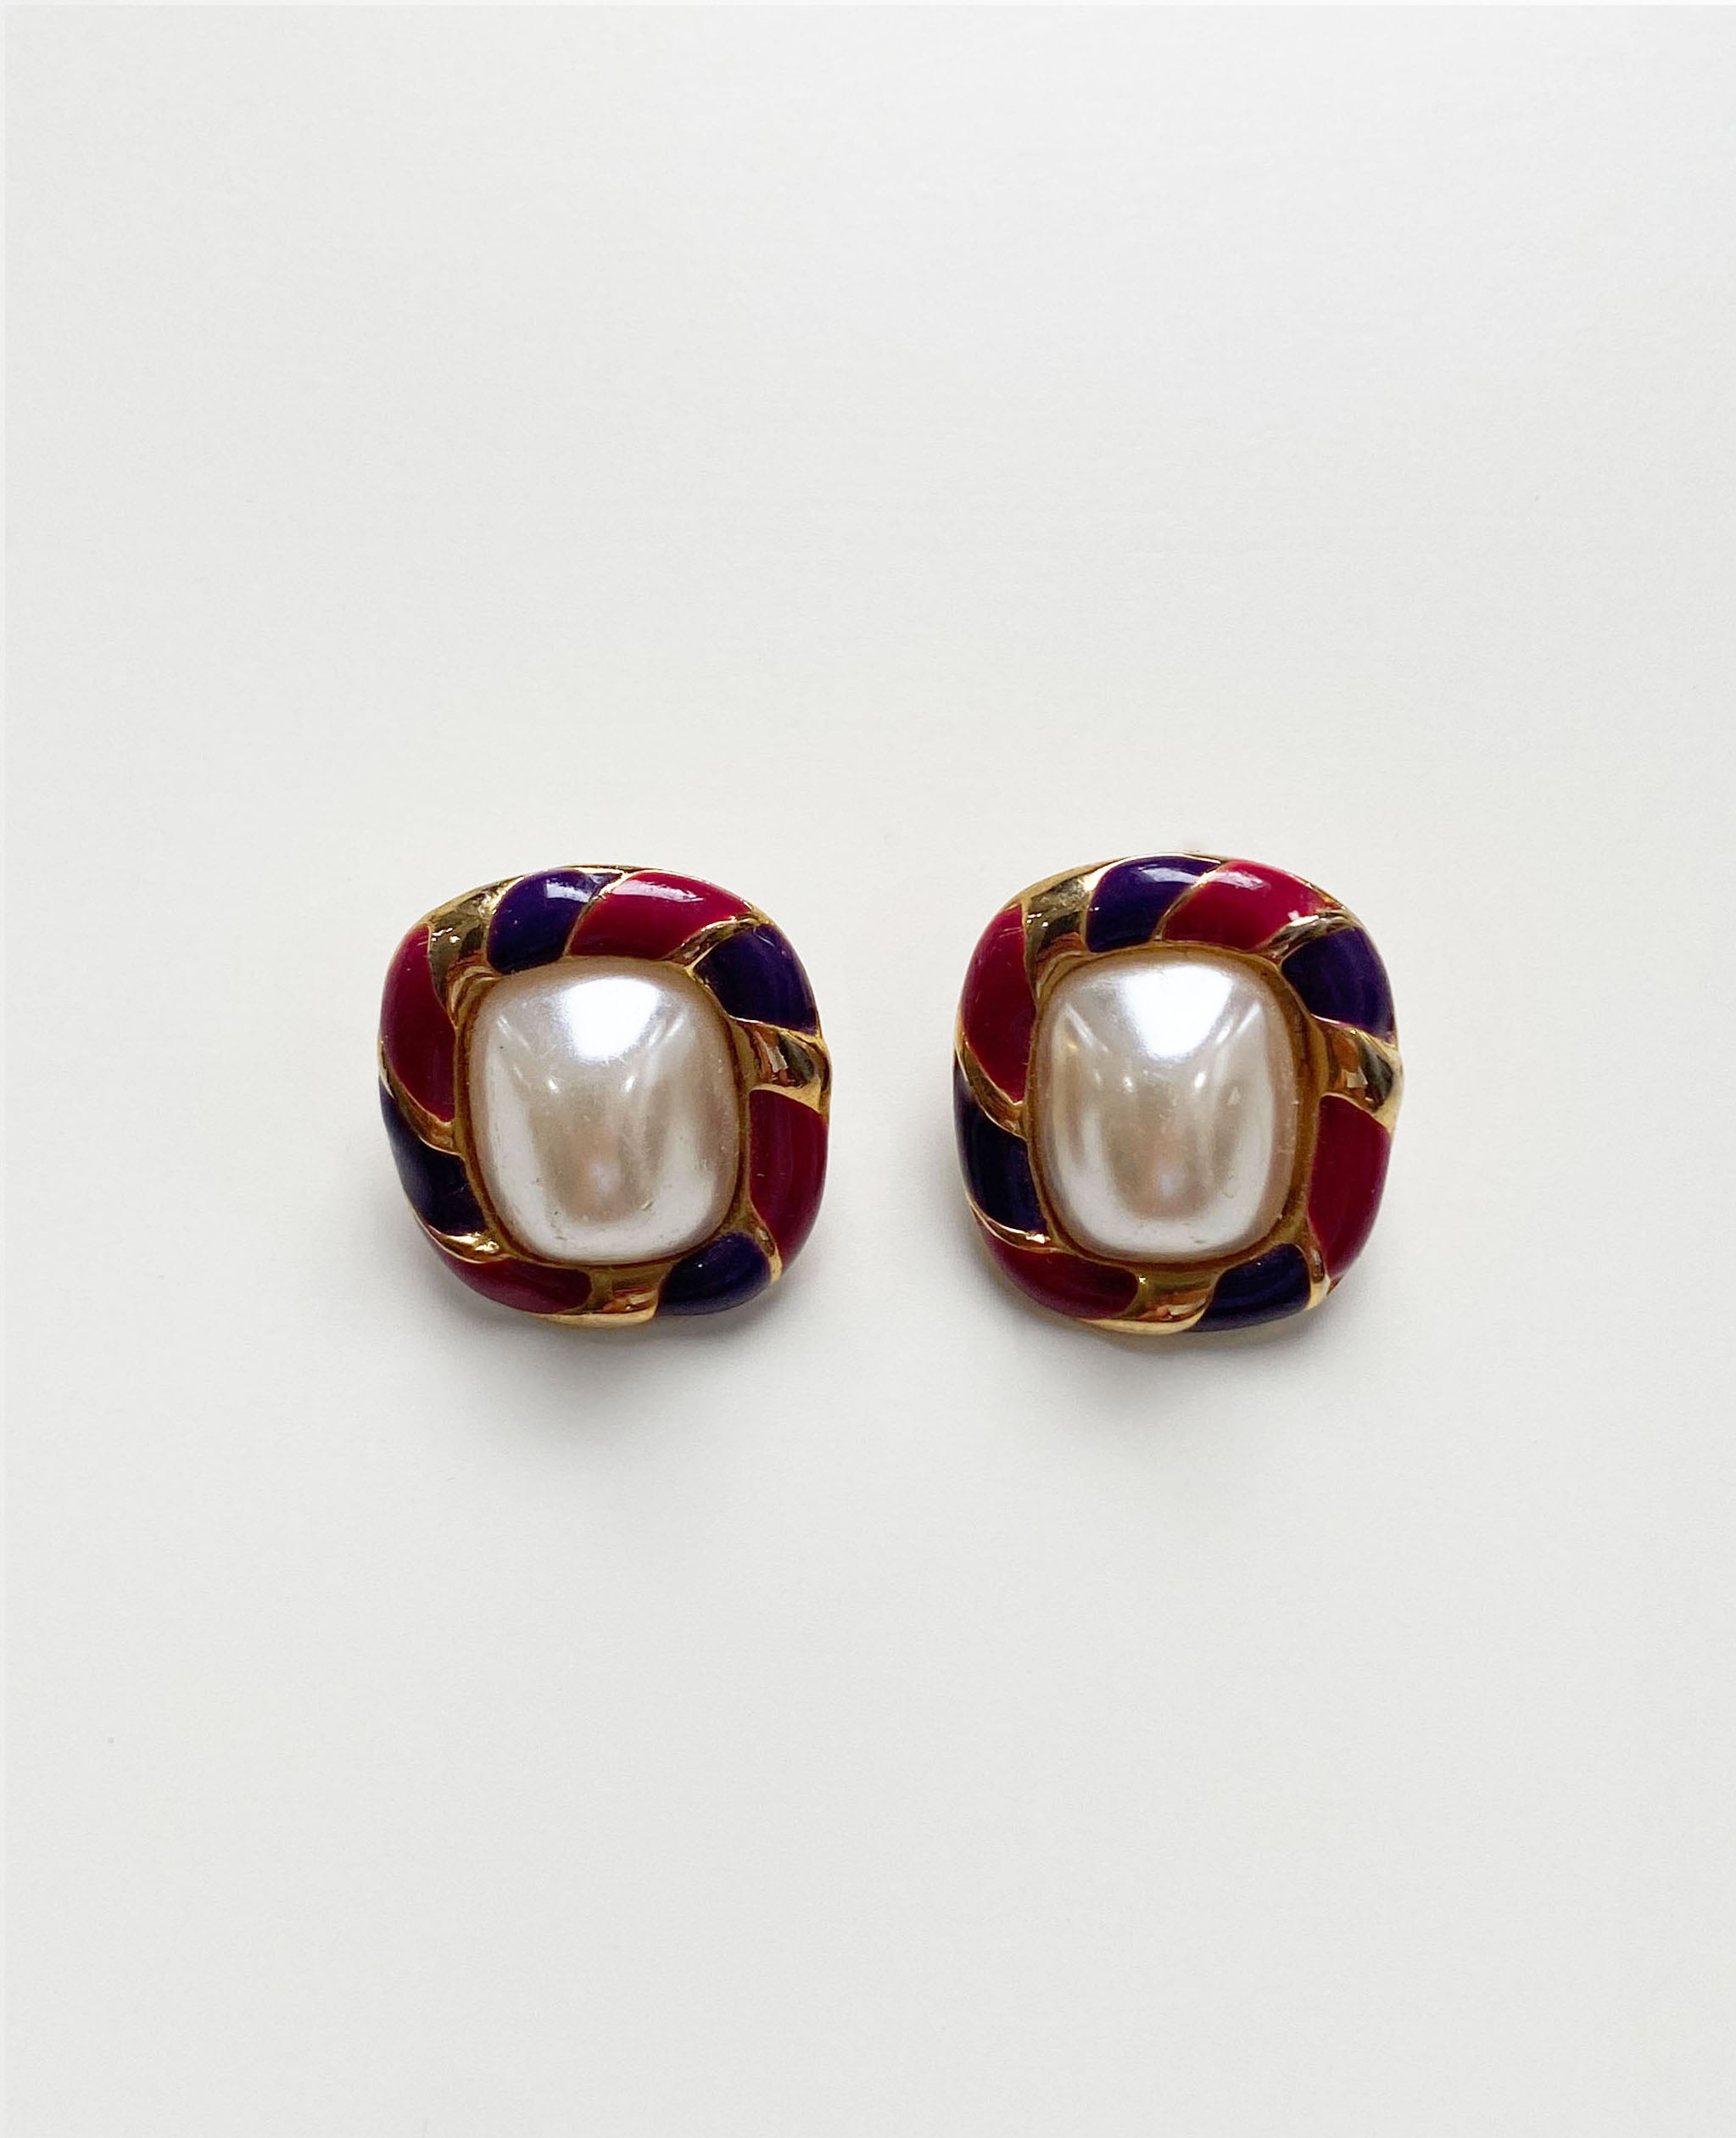 Stripe Earrings with Pearlescent Center